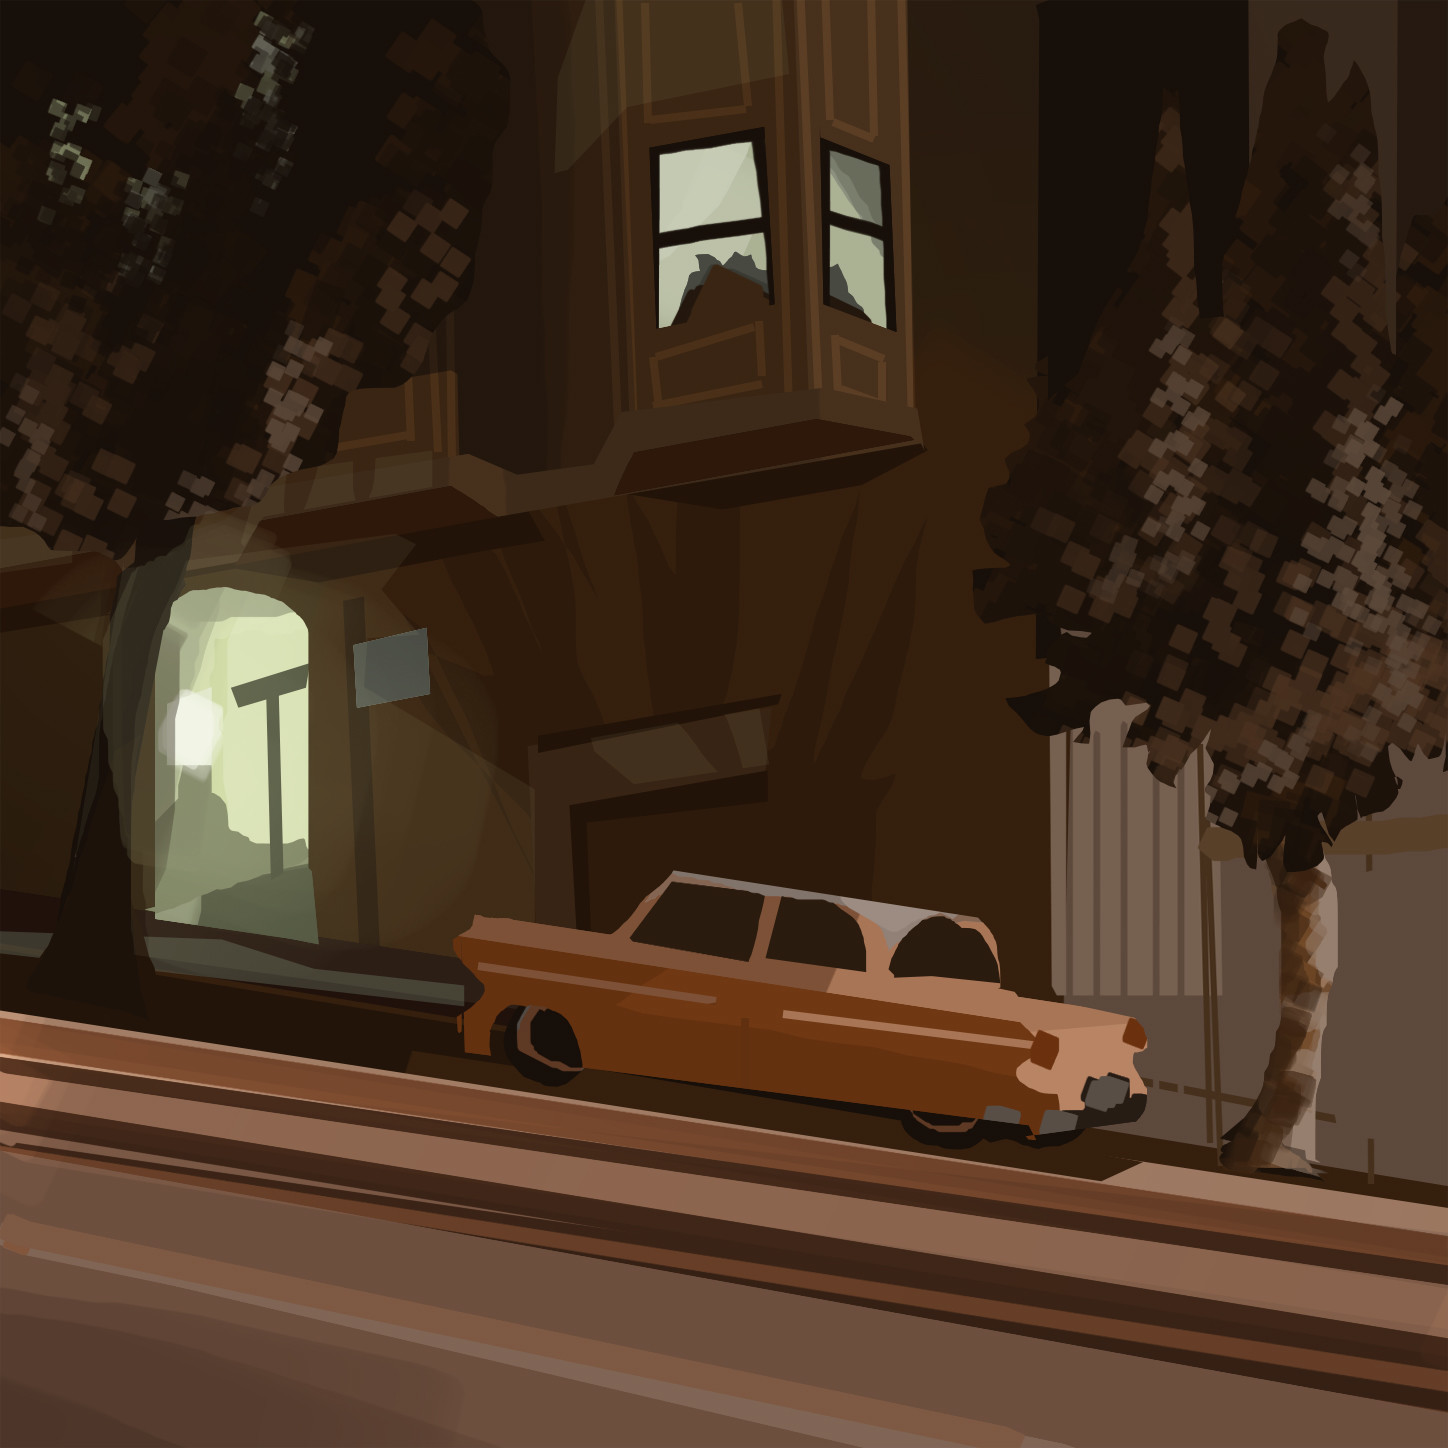 Taxi Street Study - from a photo